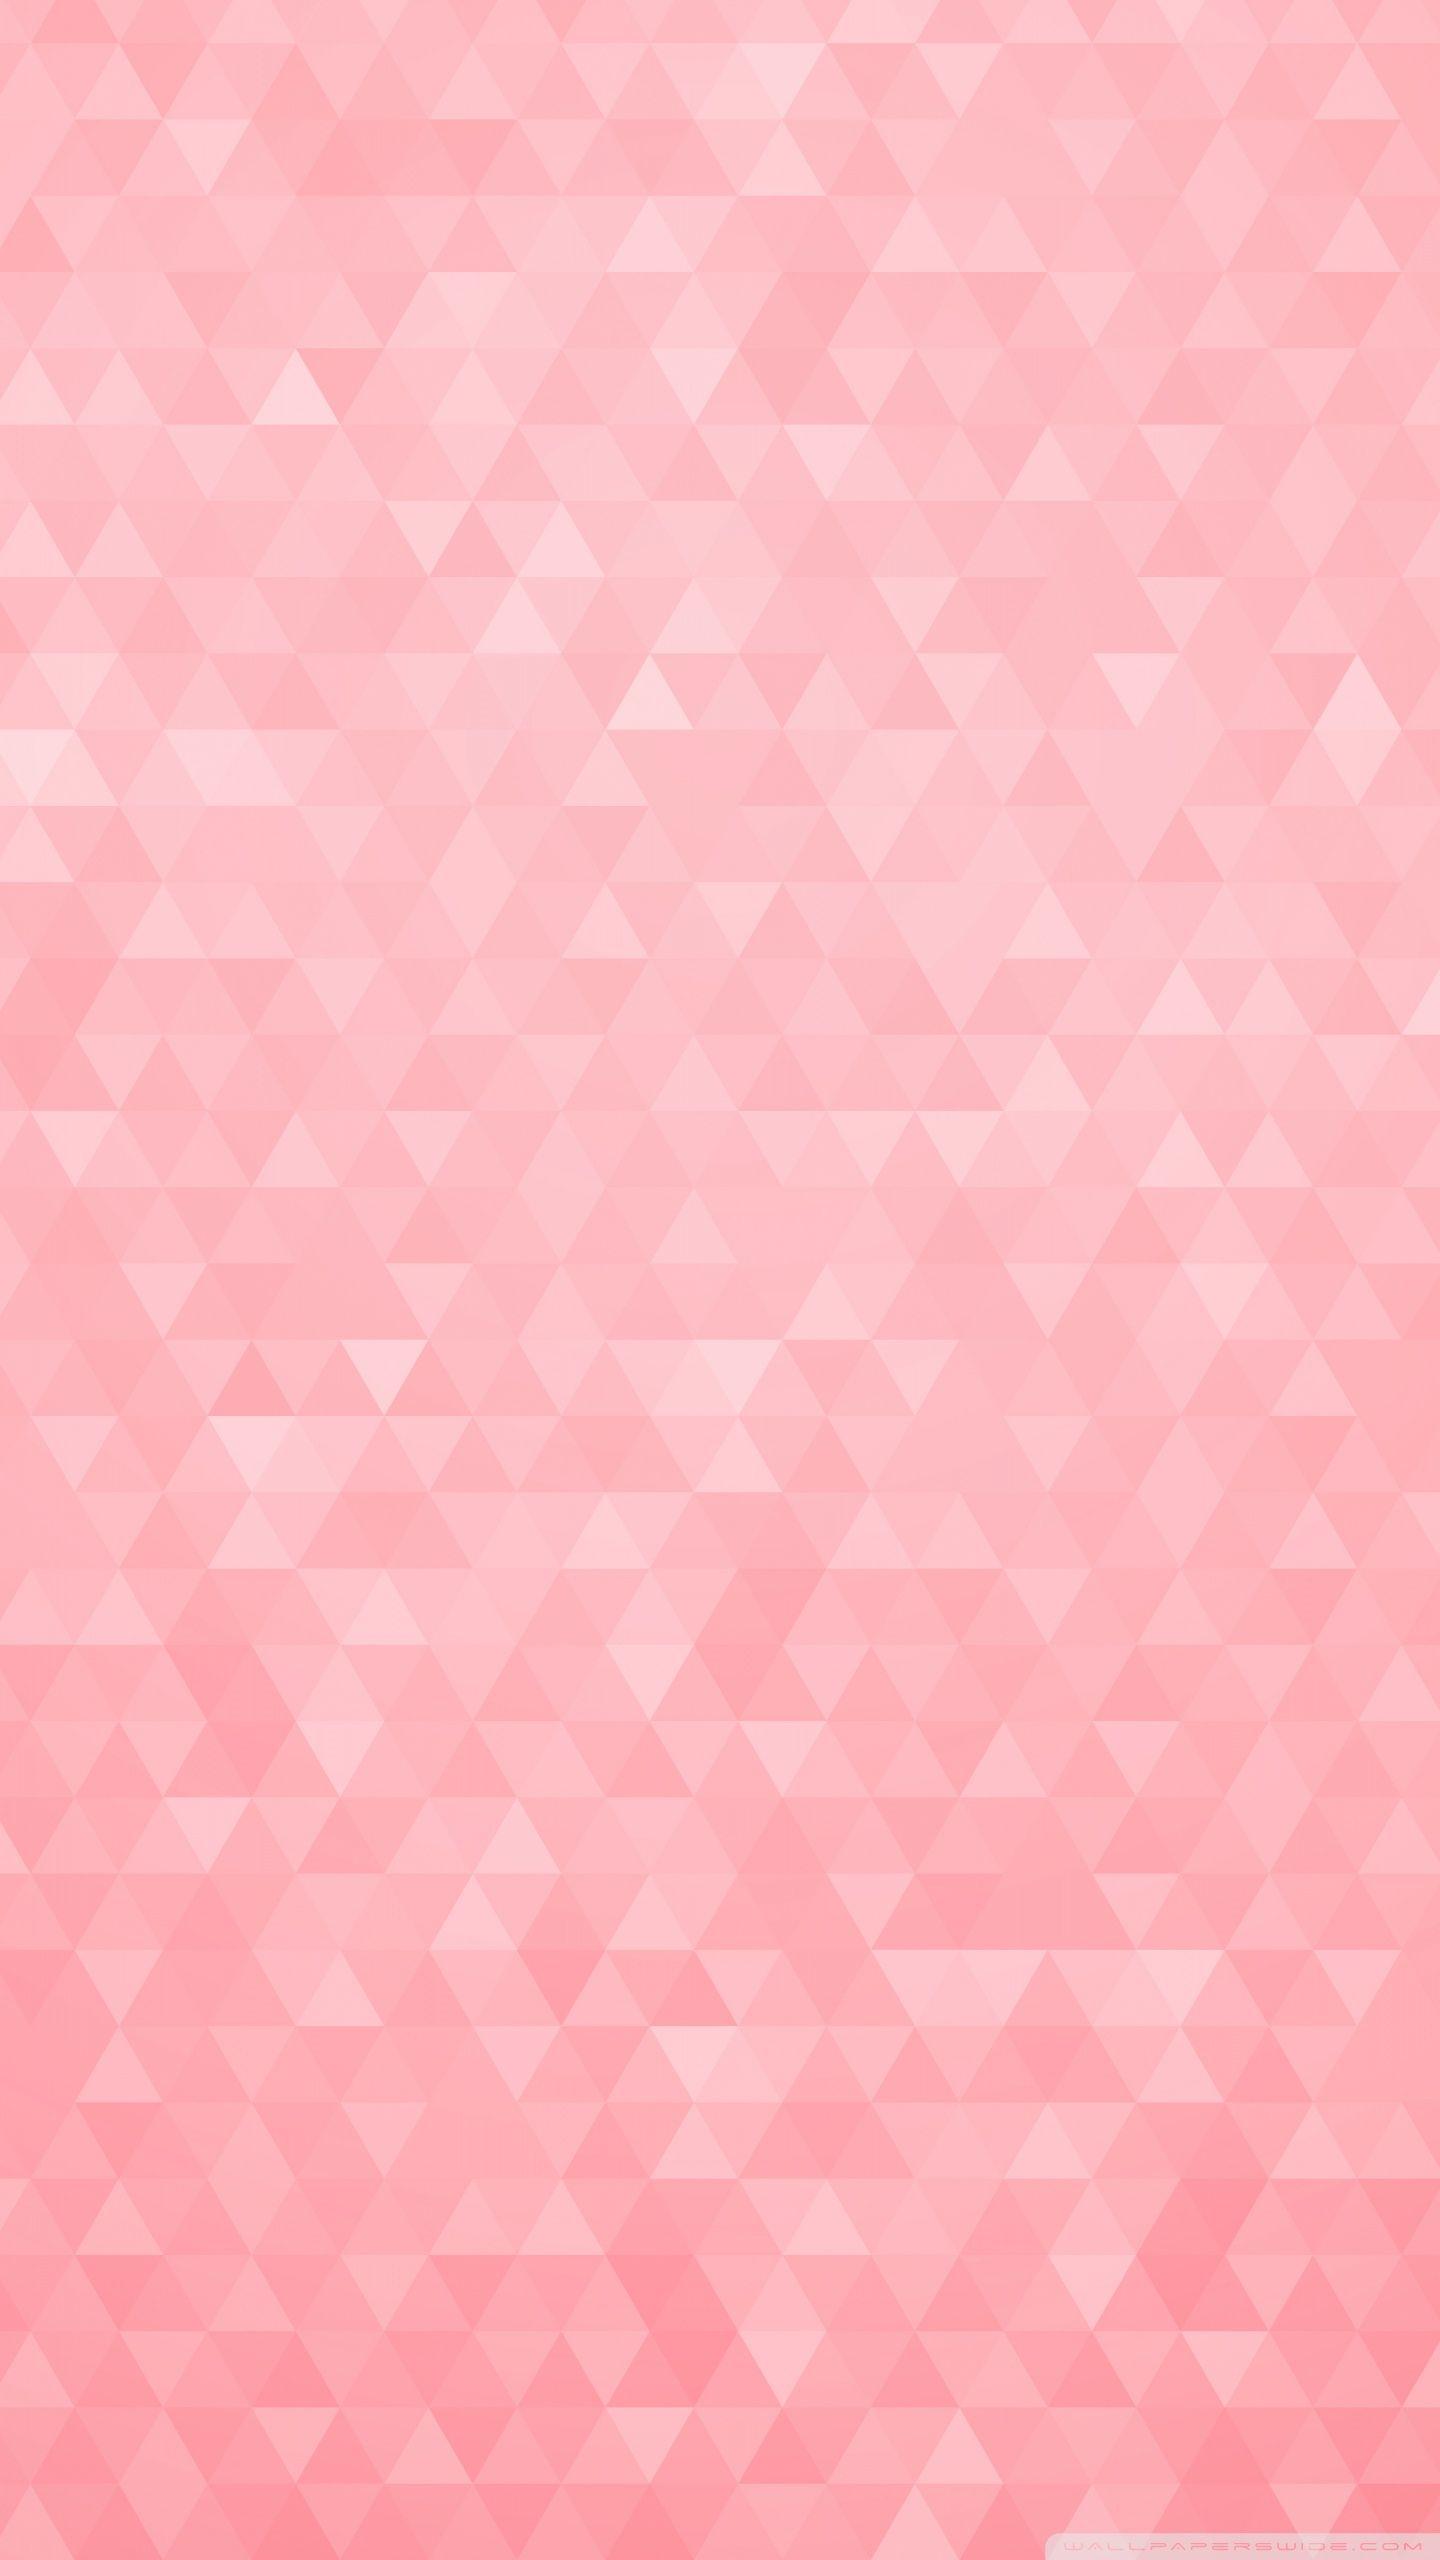 Pink Pattern Wallpapers - Top Free Pink Pattern Backgrounds ...